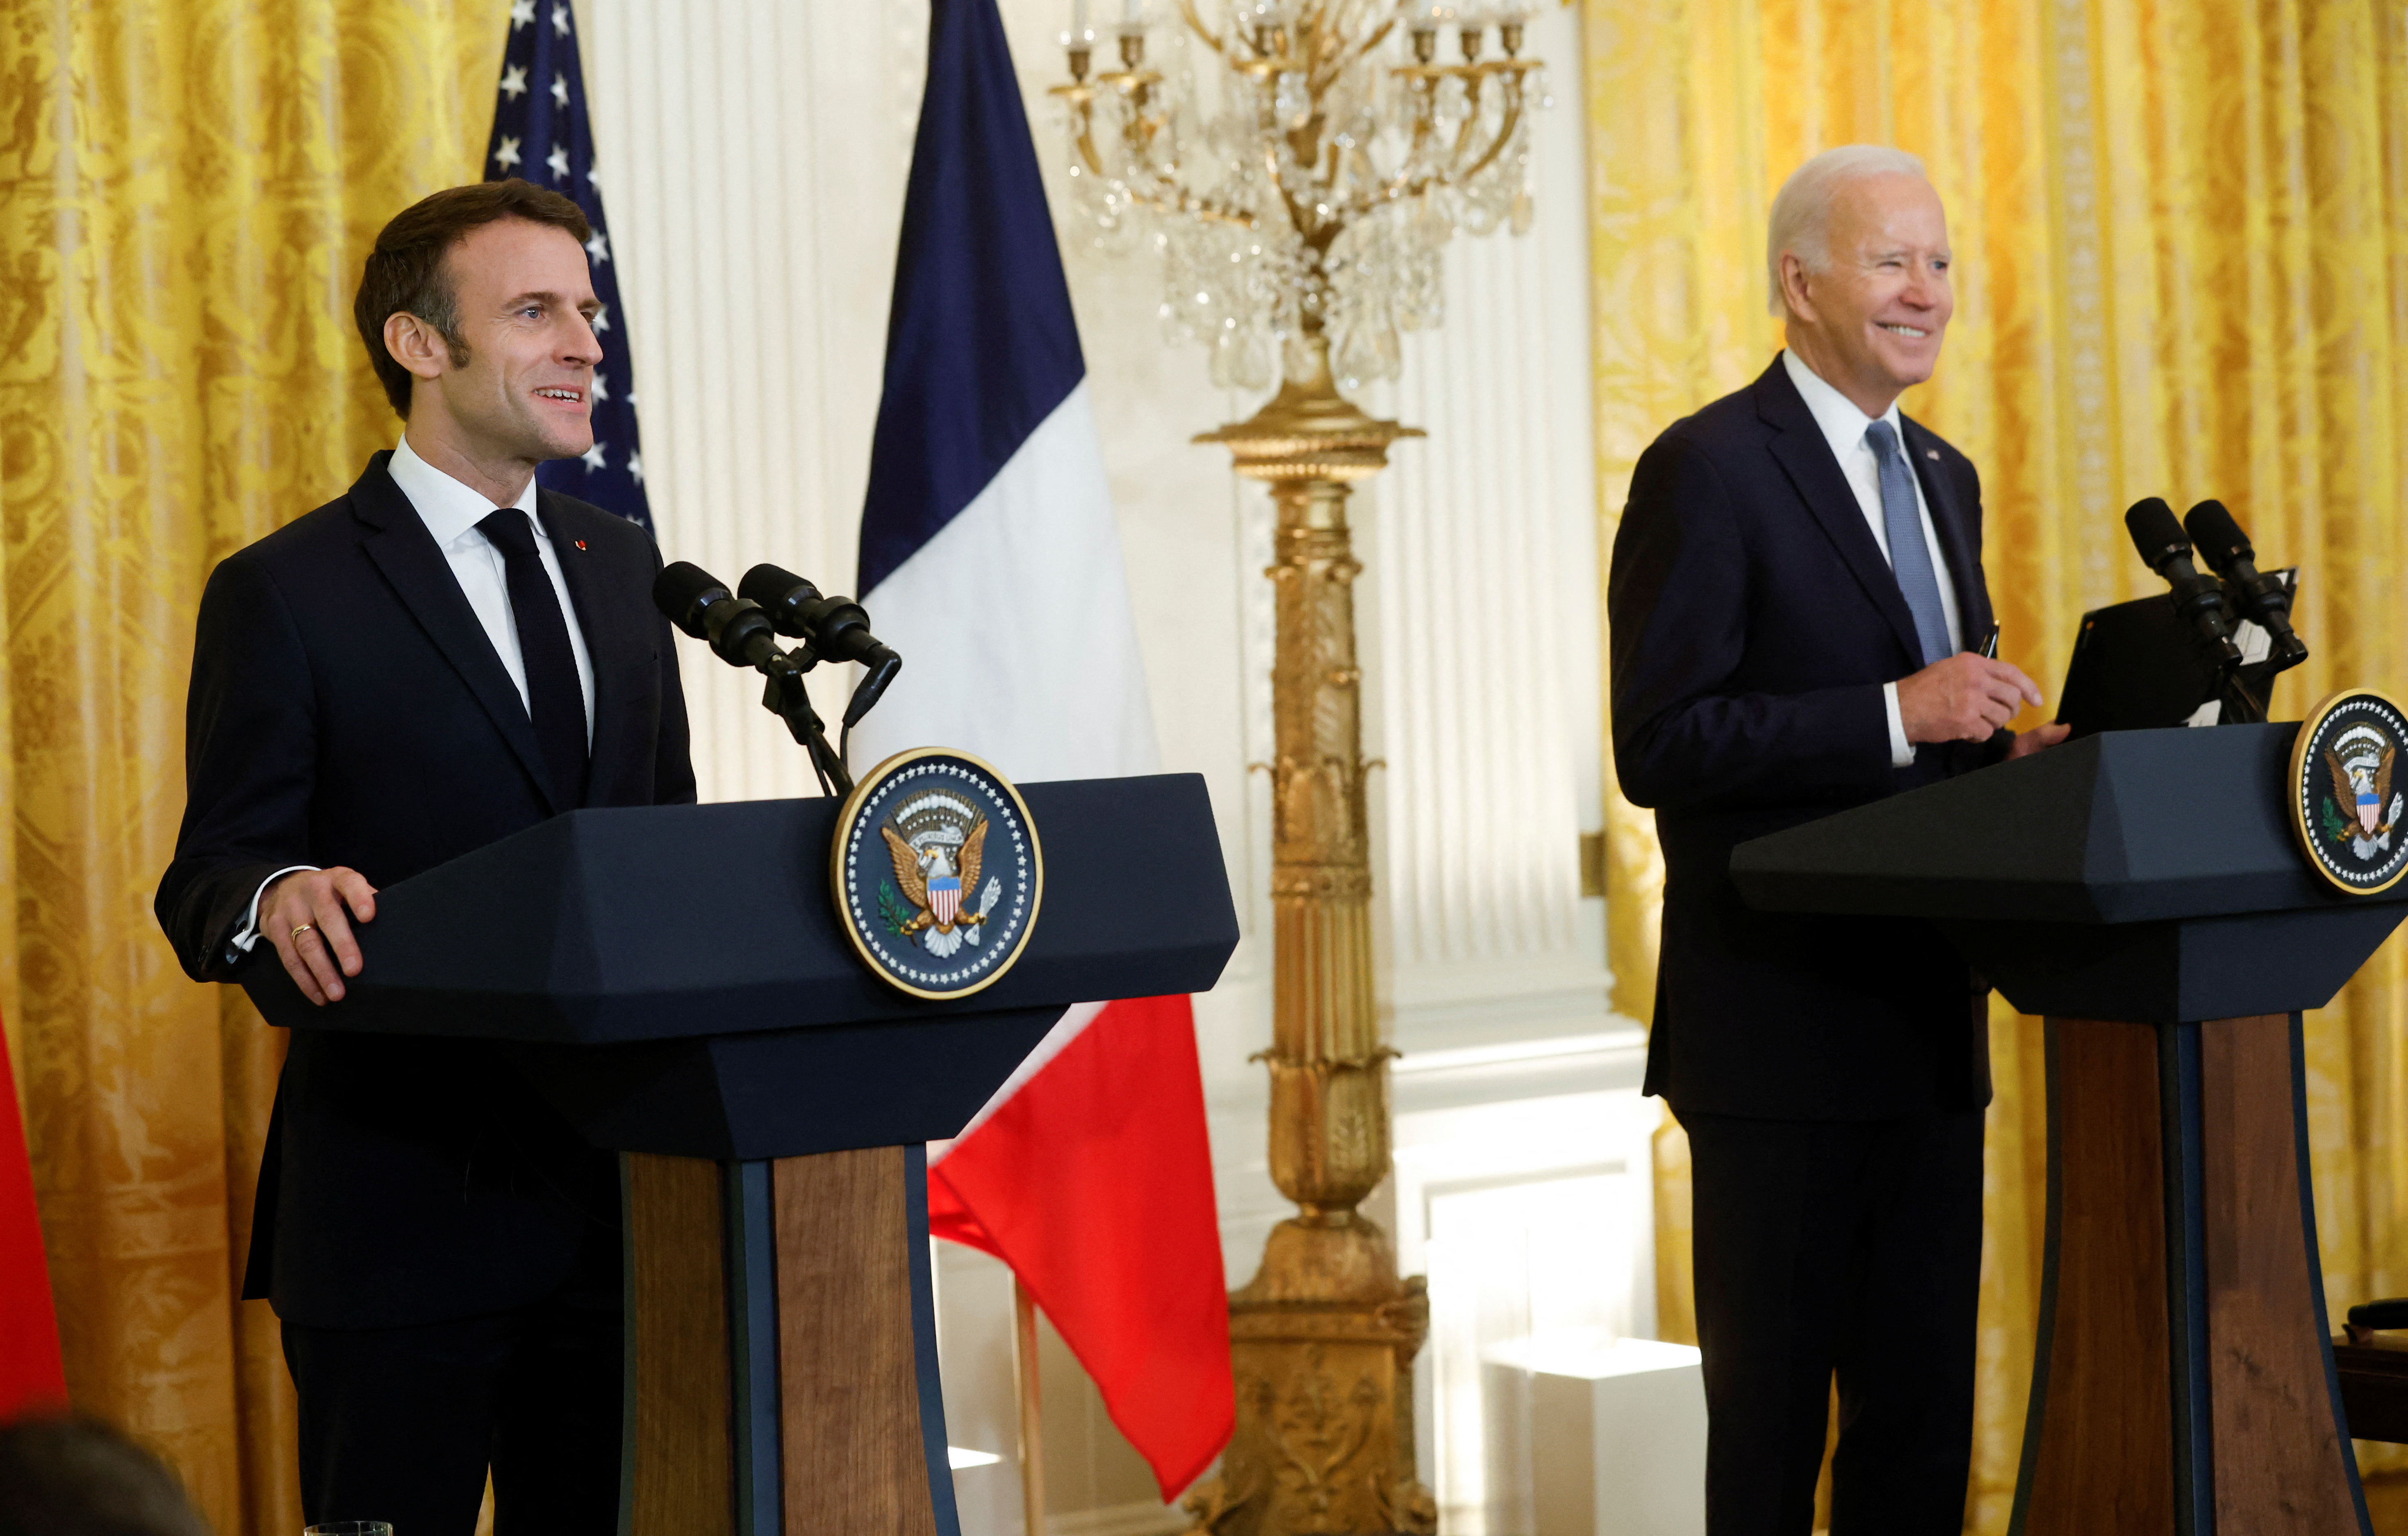 U.S. President Biden and France's President Macron hold joint news conference at the White House in Washington